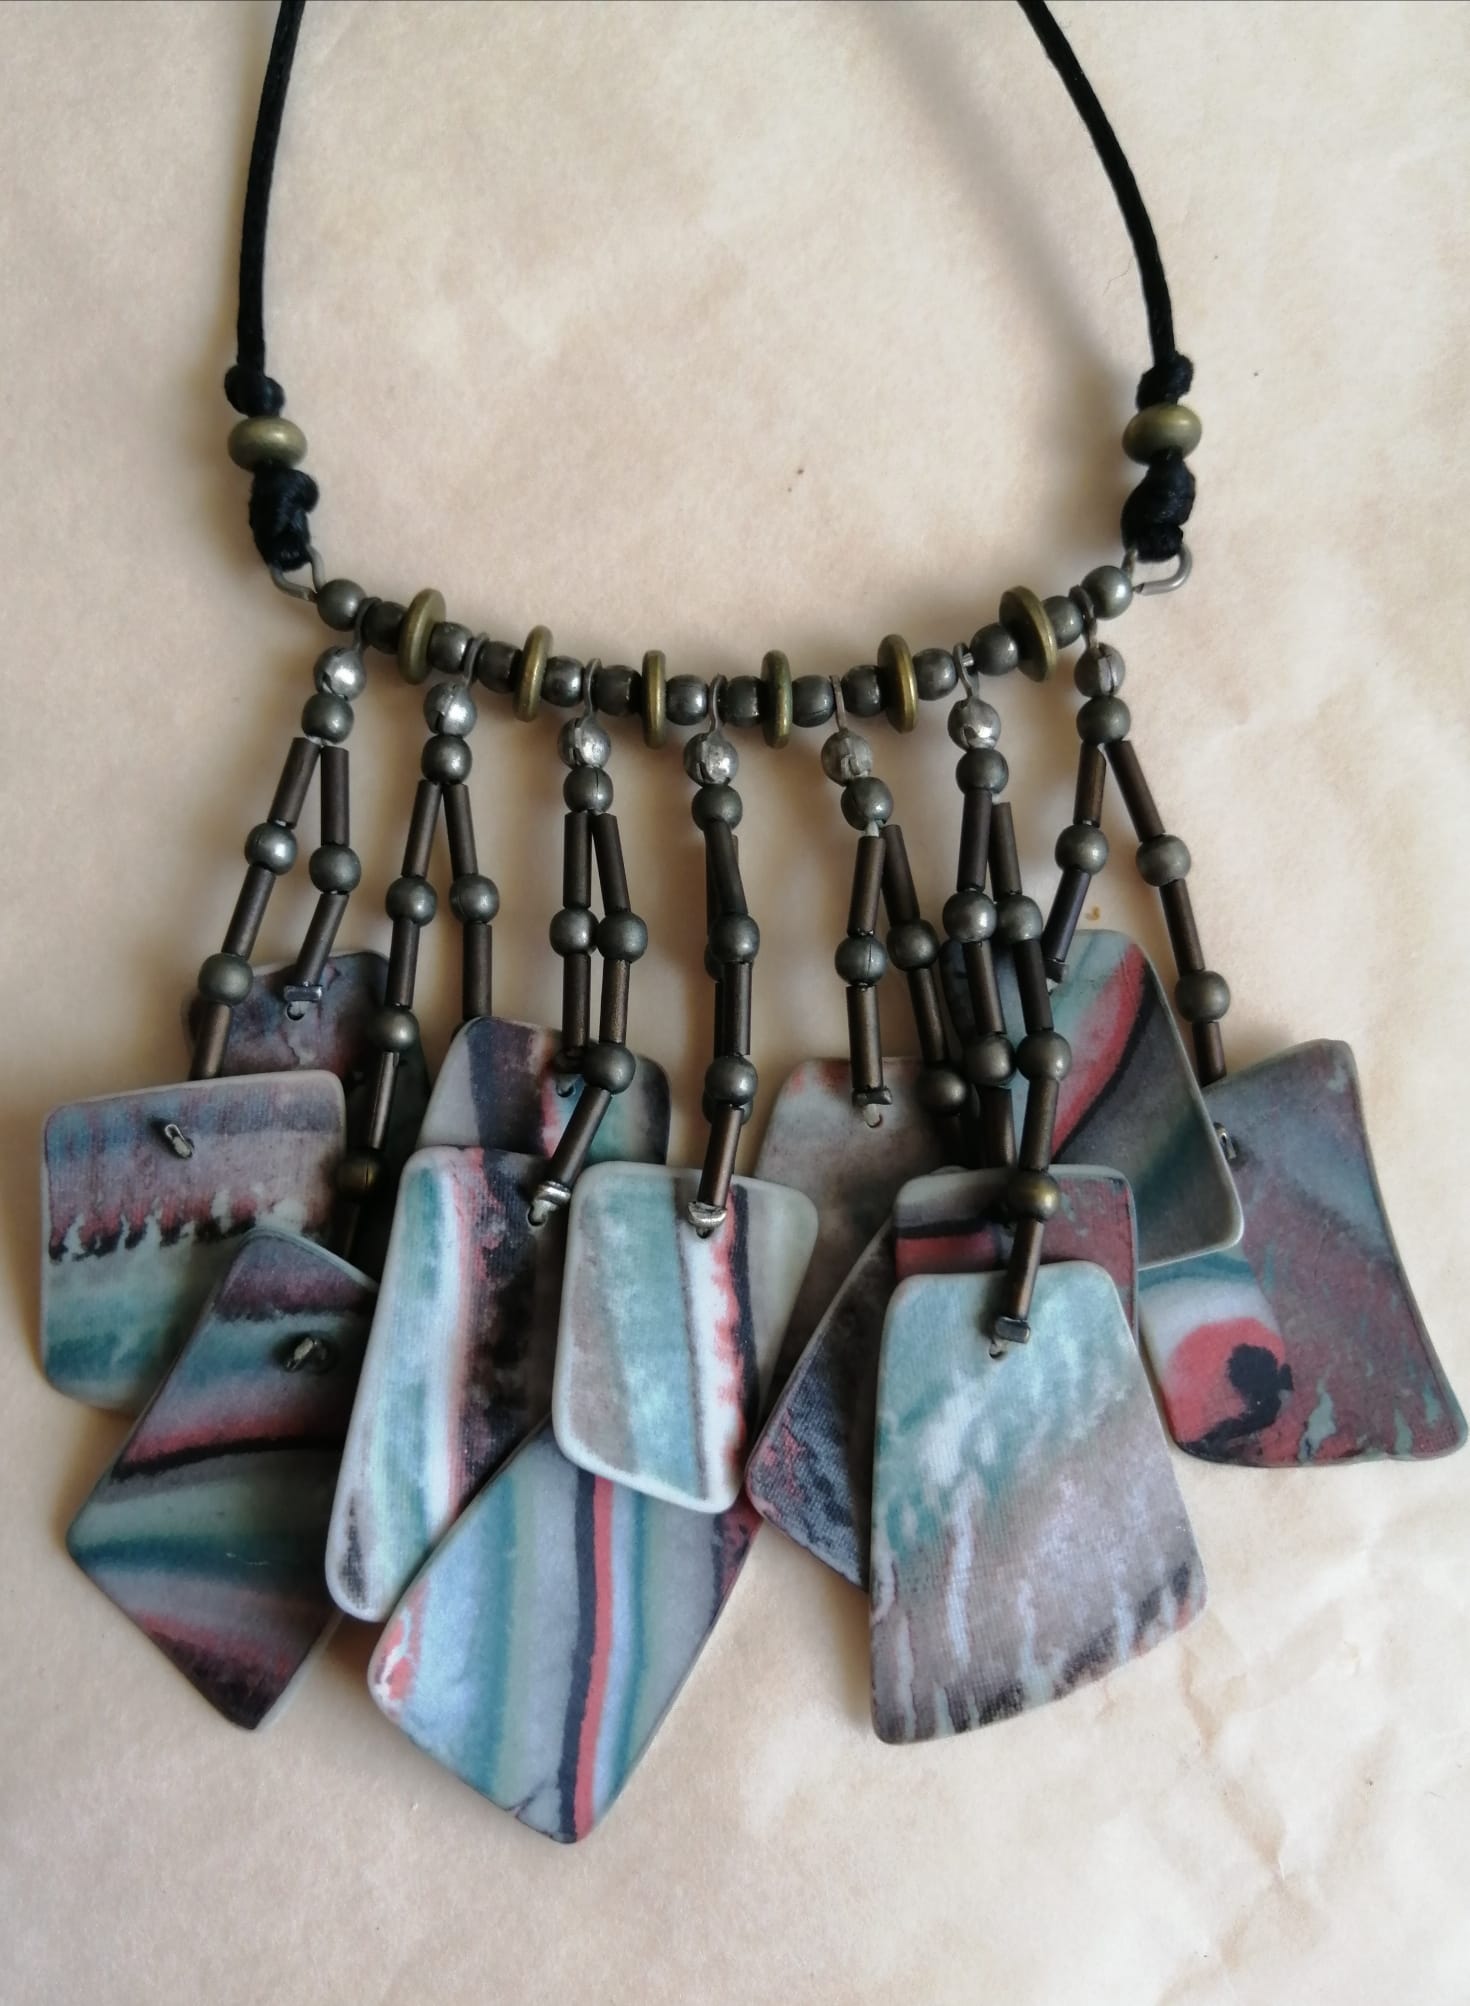 14 small plates necklace